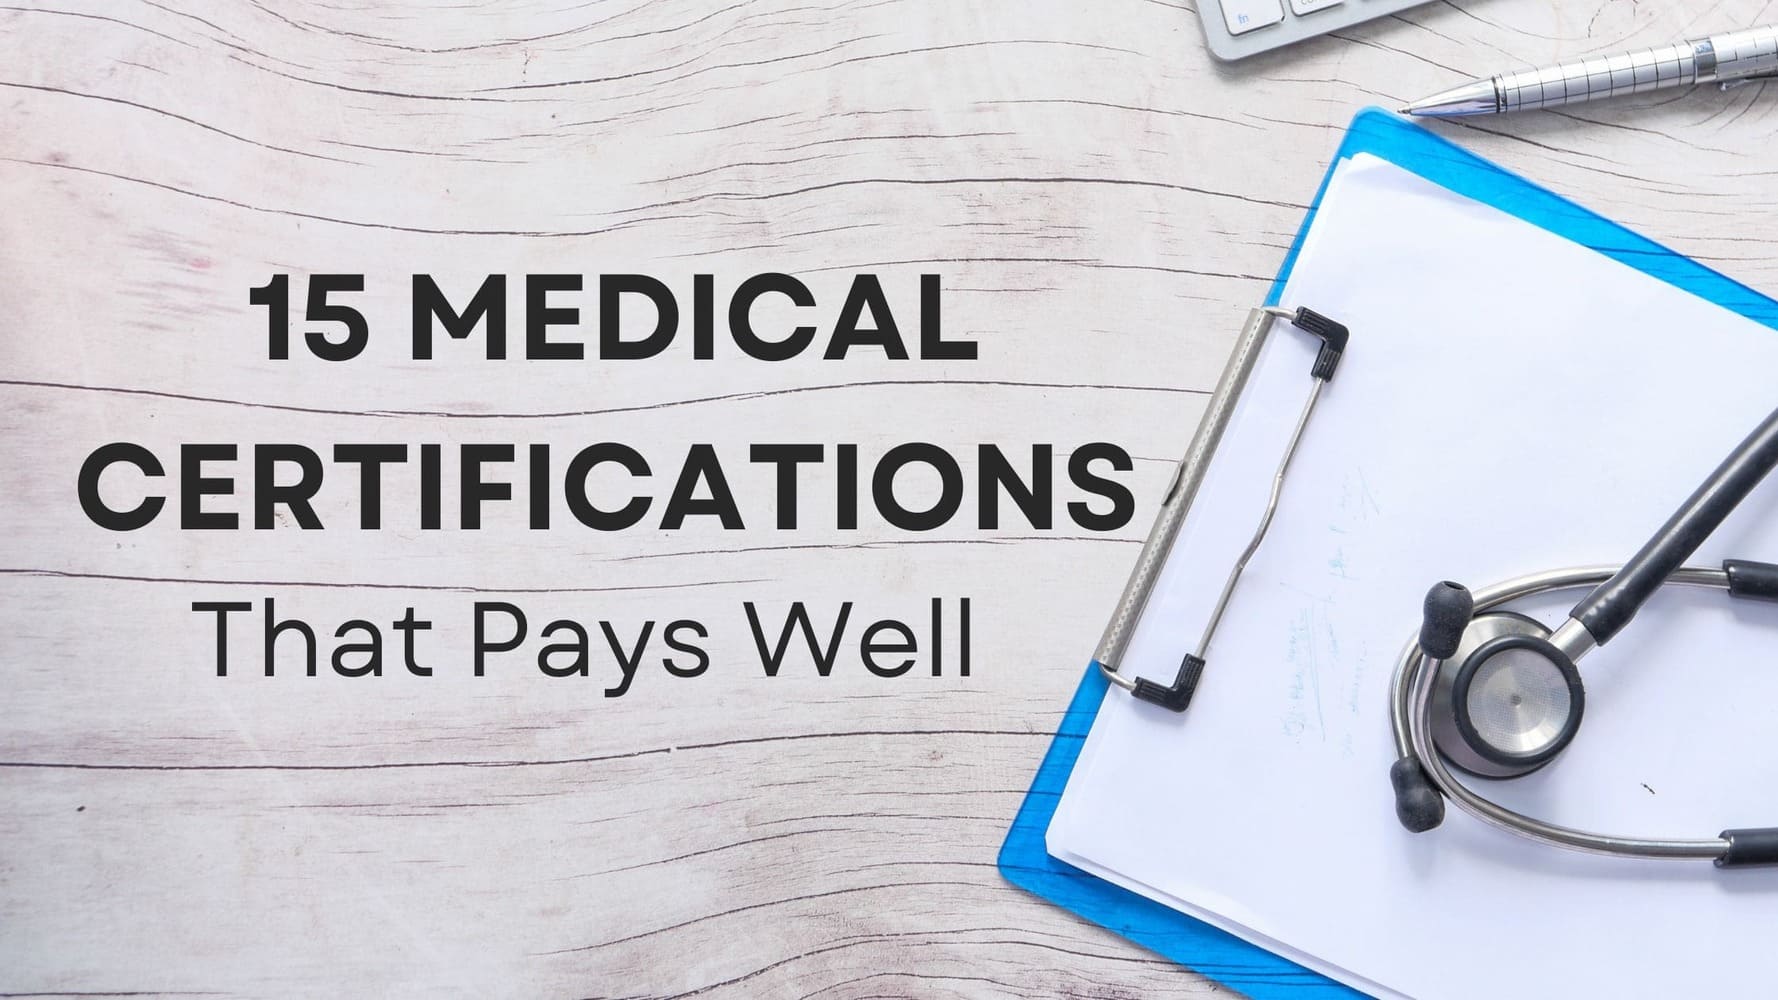 15 Medical Certifications That Pays Well (2023 Salaries)